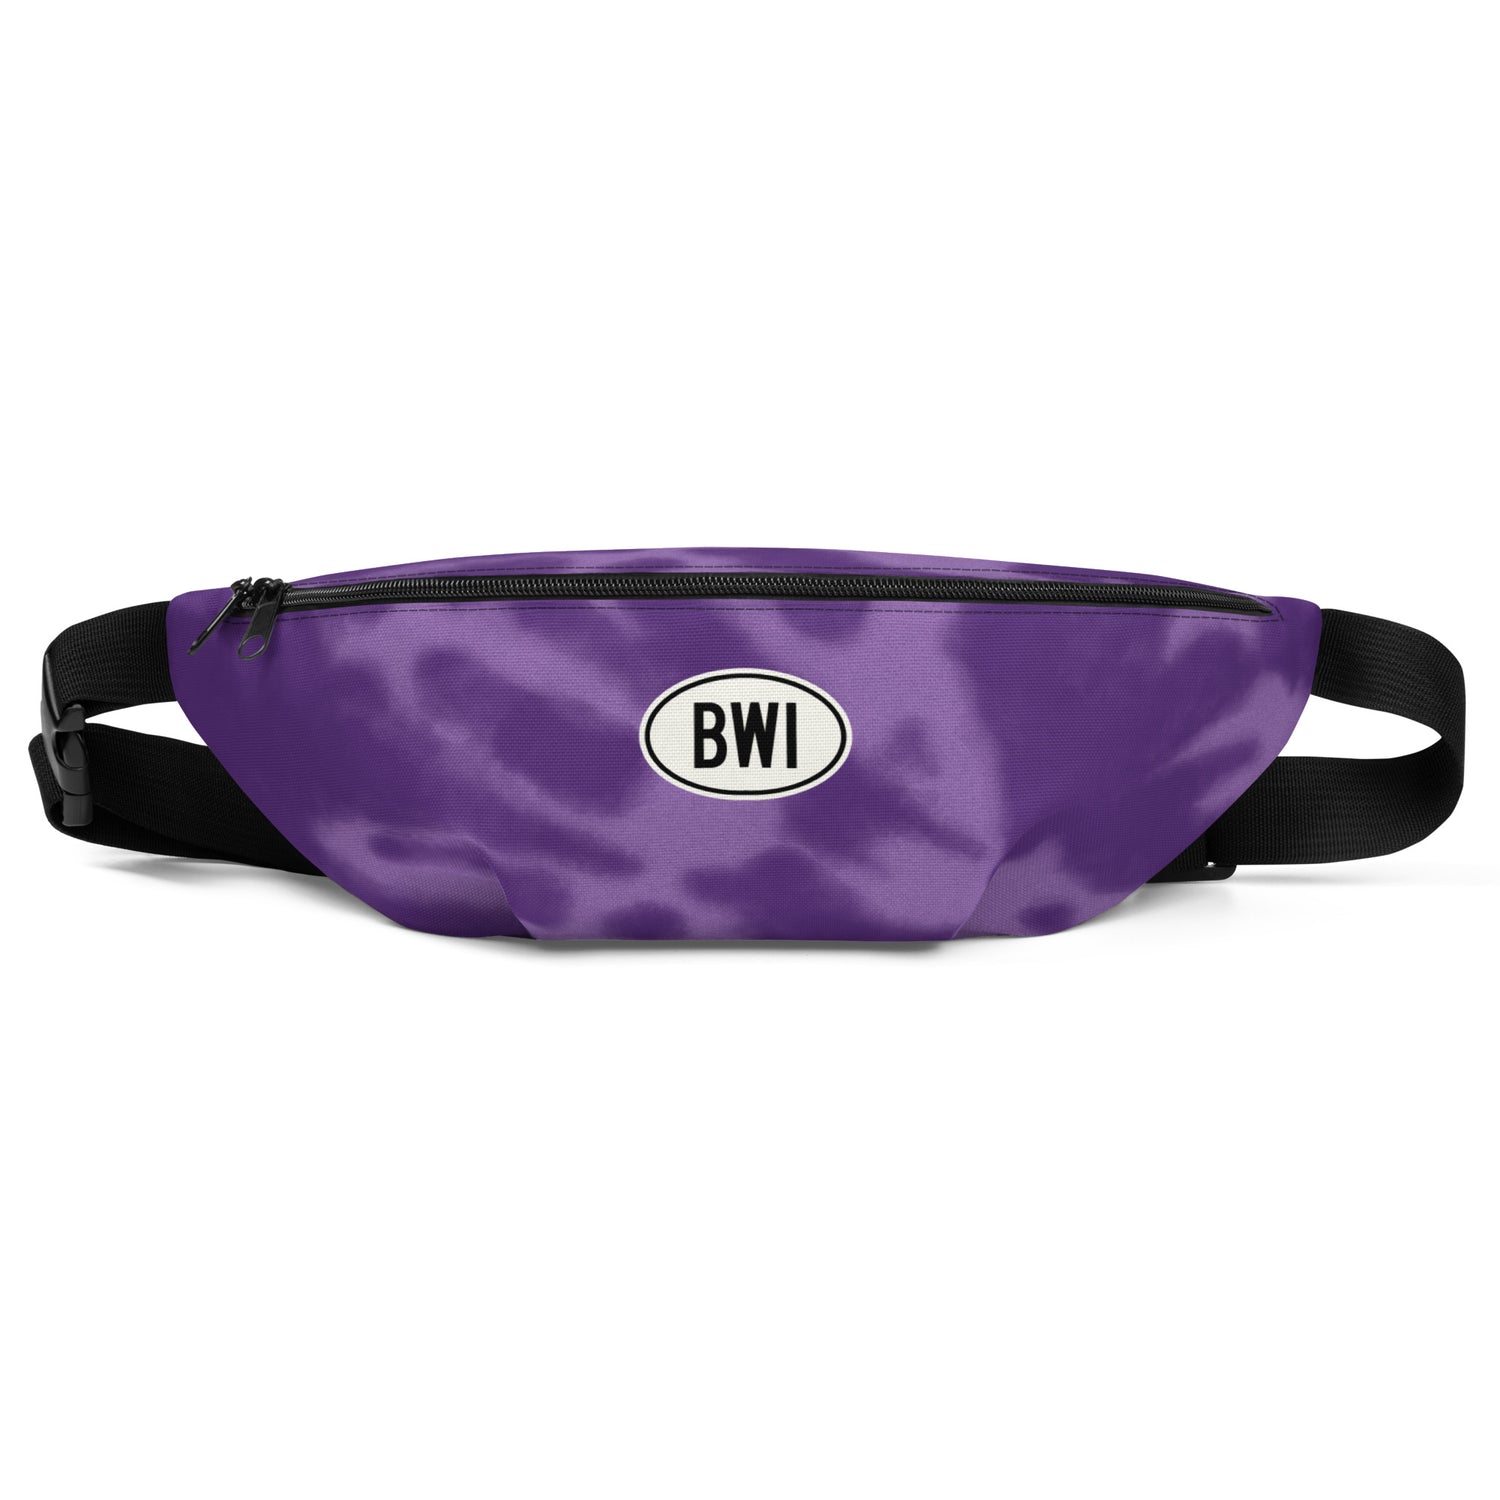 Baltimore Maryland Backpacks, Fanny Packs and Tote Bags • BWI Airport Code